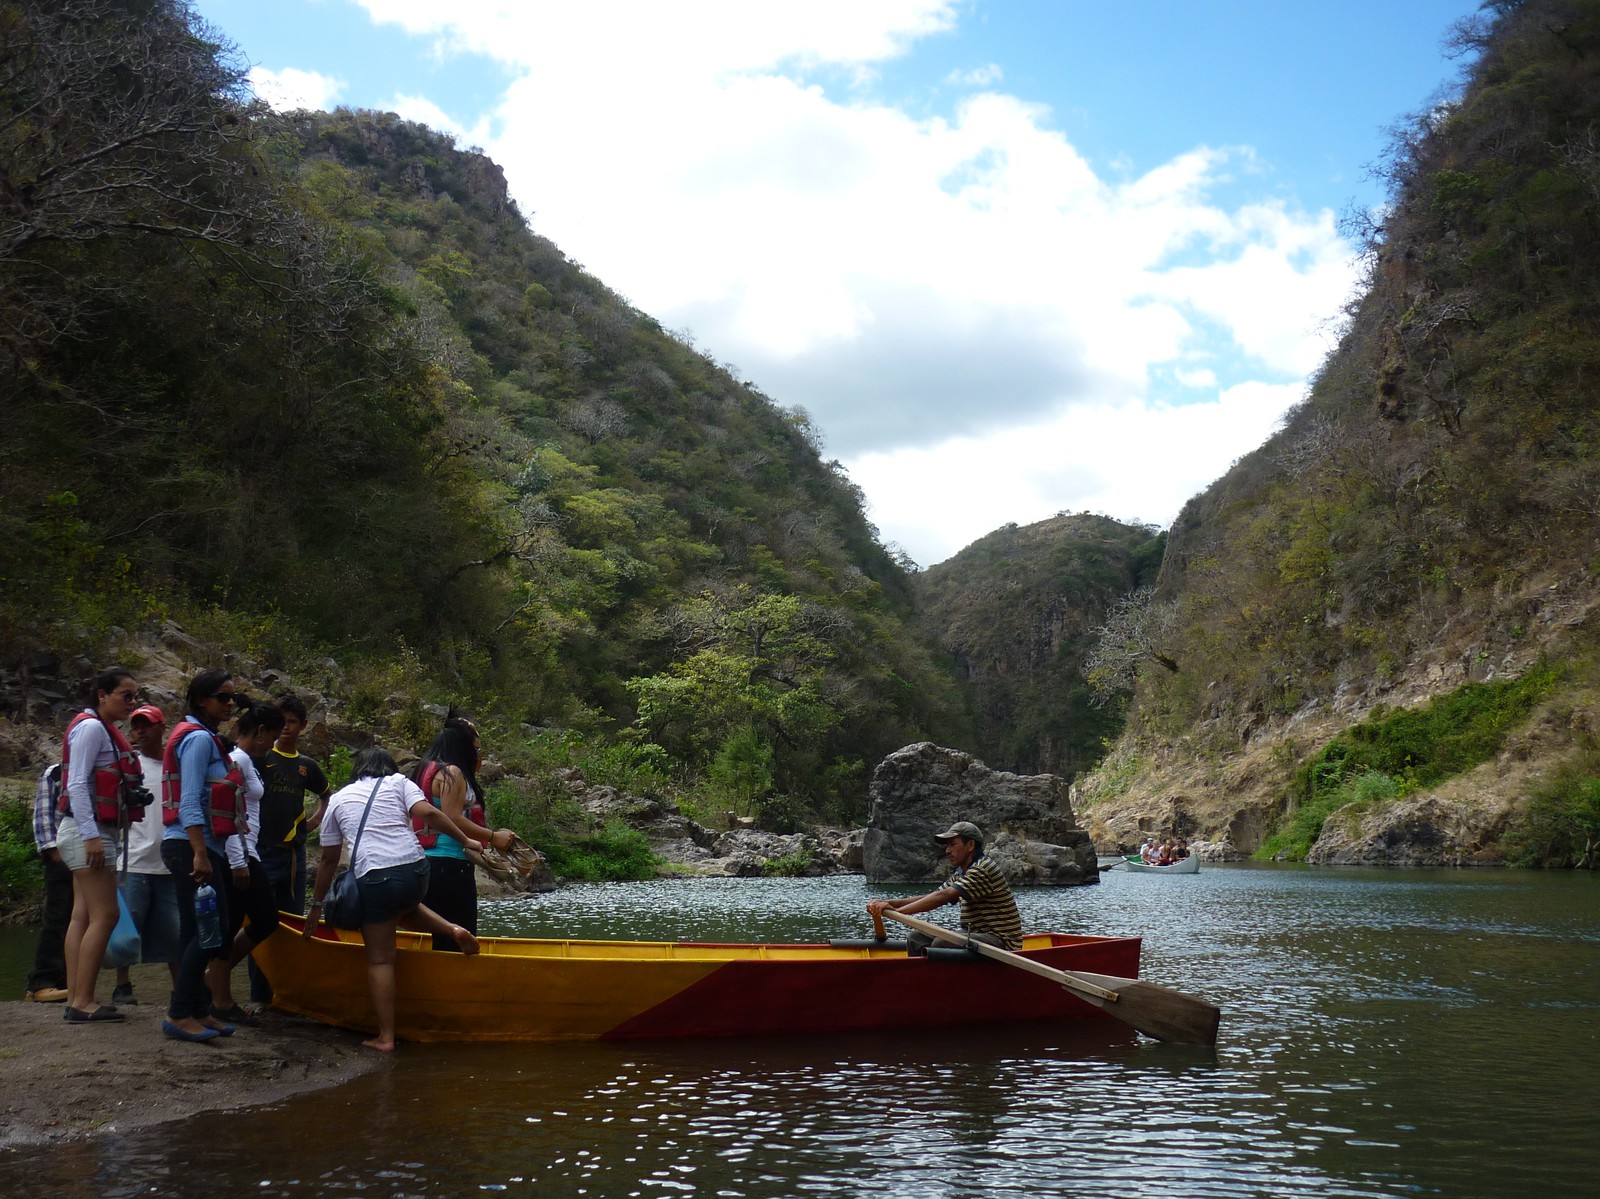 The boats that take you out of the eastern end of the canyon